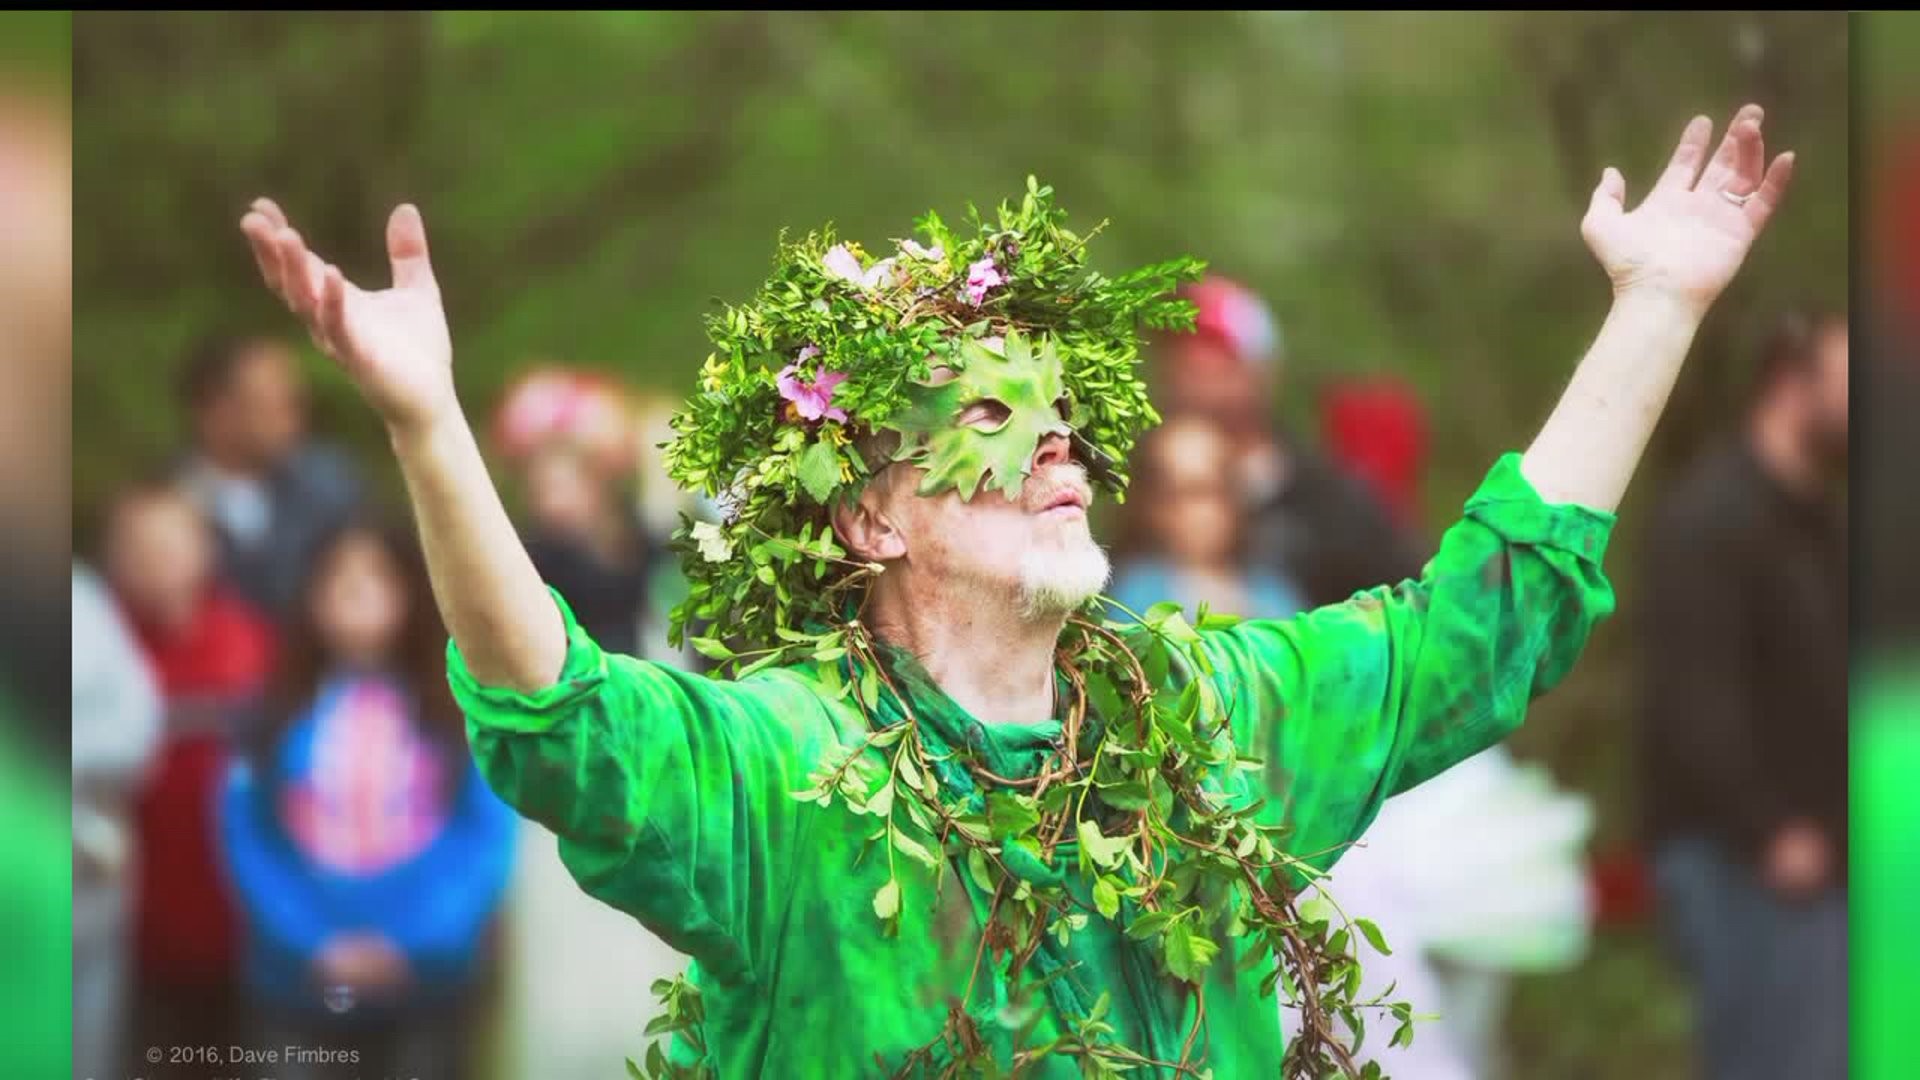 26th Annual May Day Fairie Festival set for this weekend